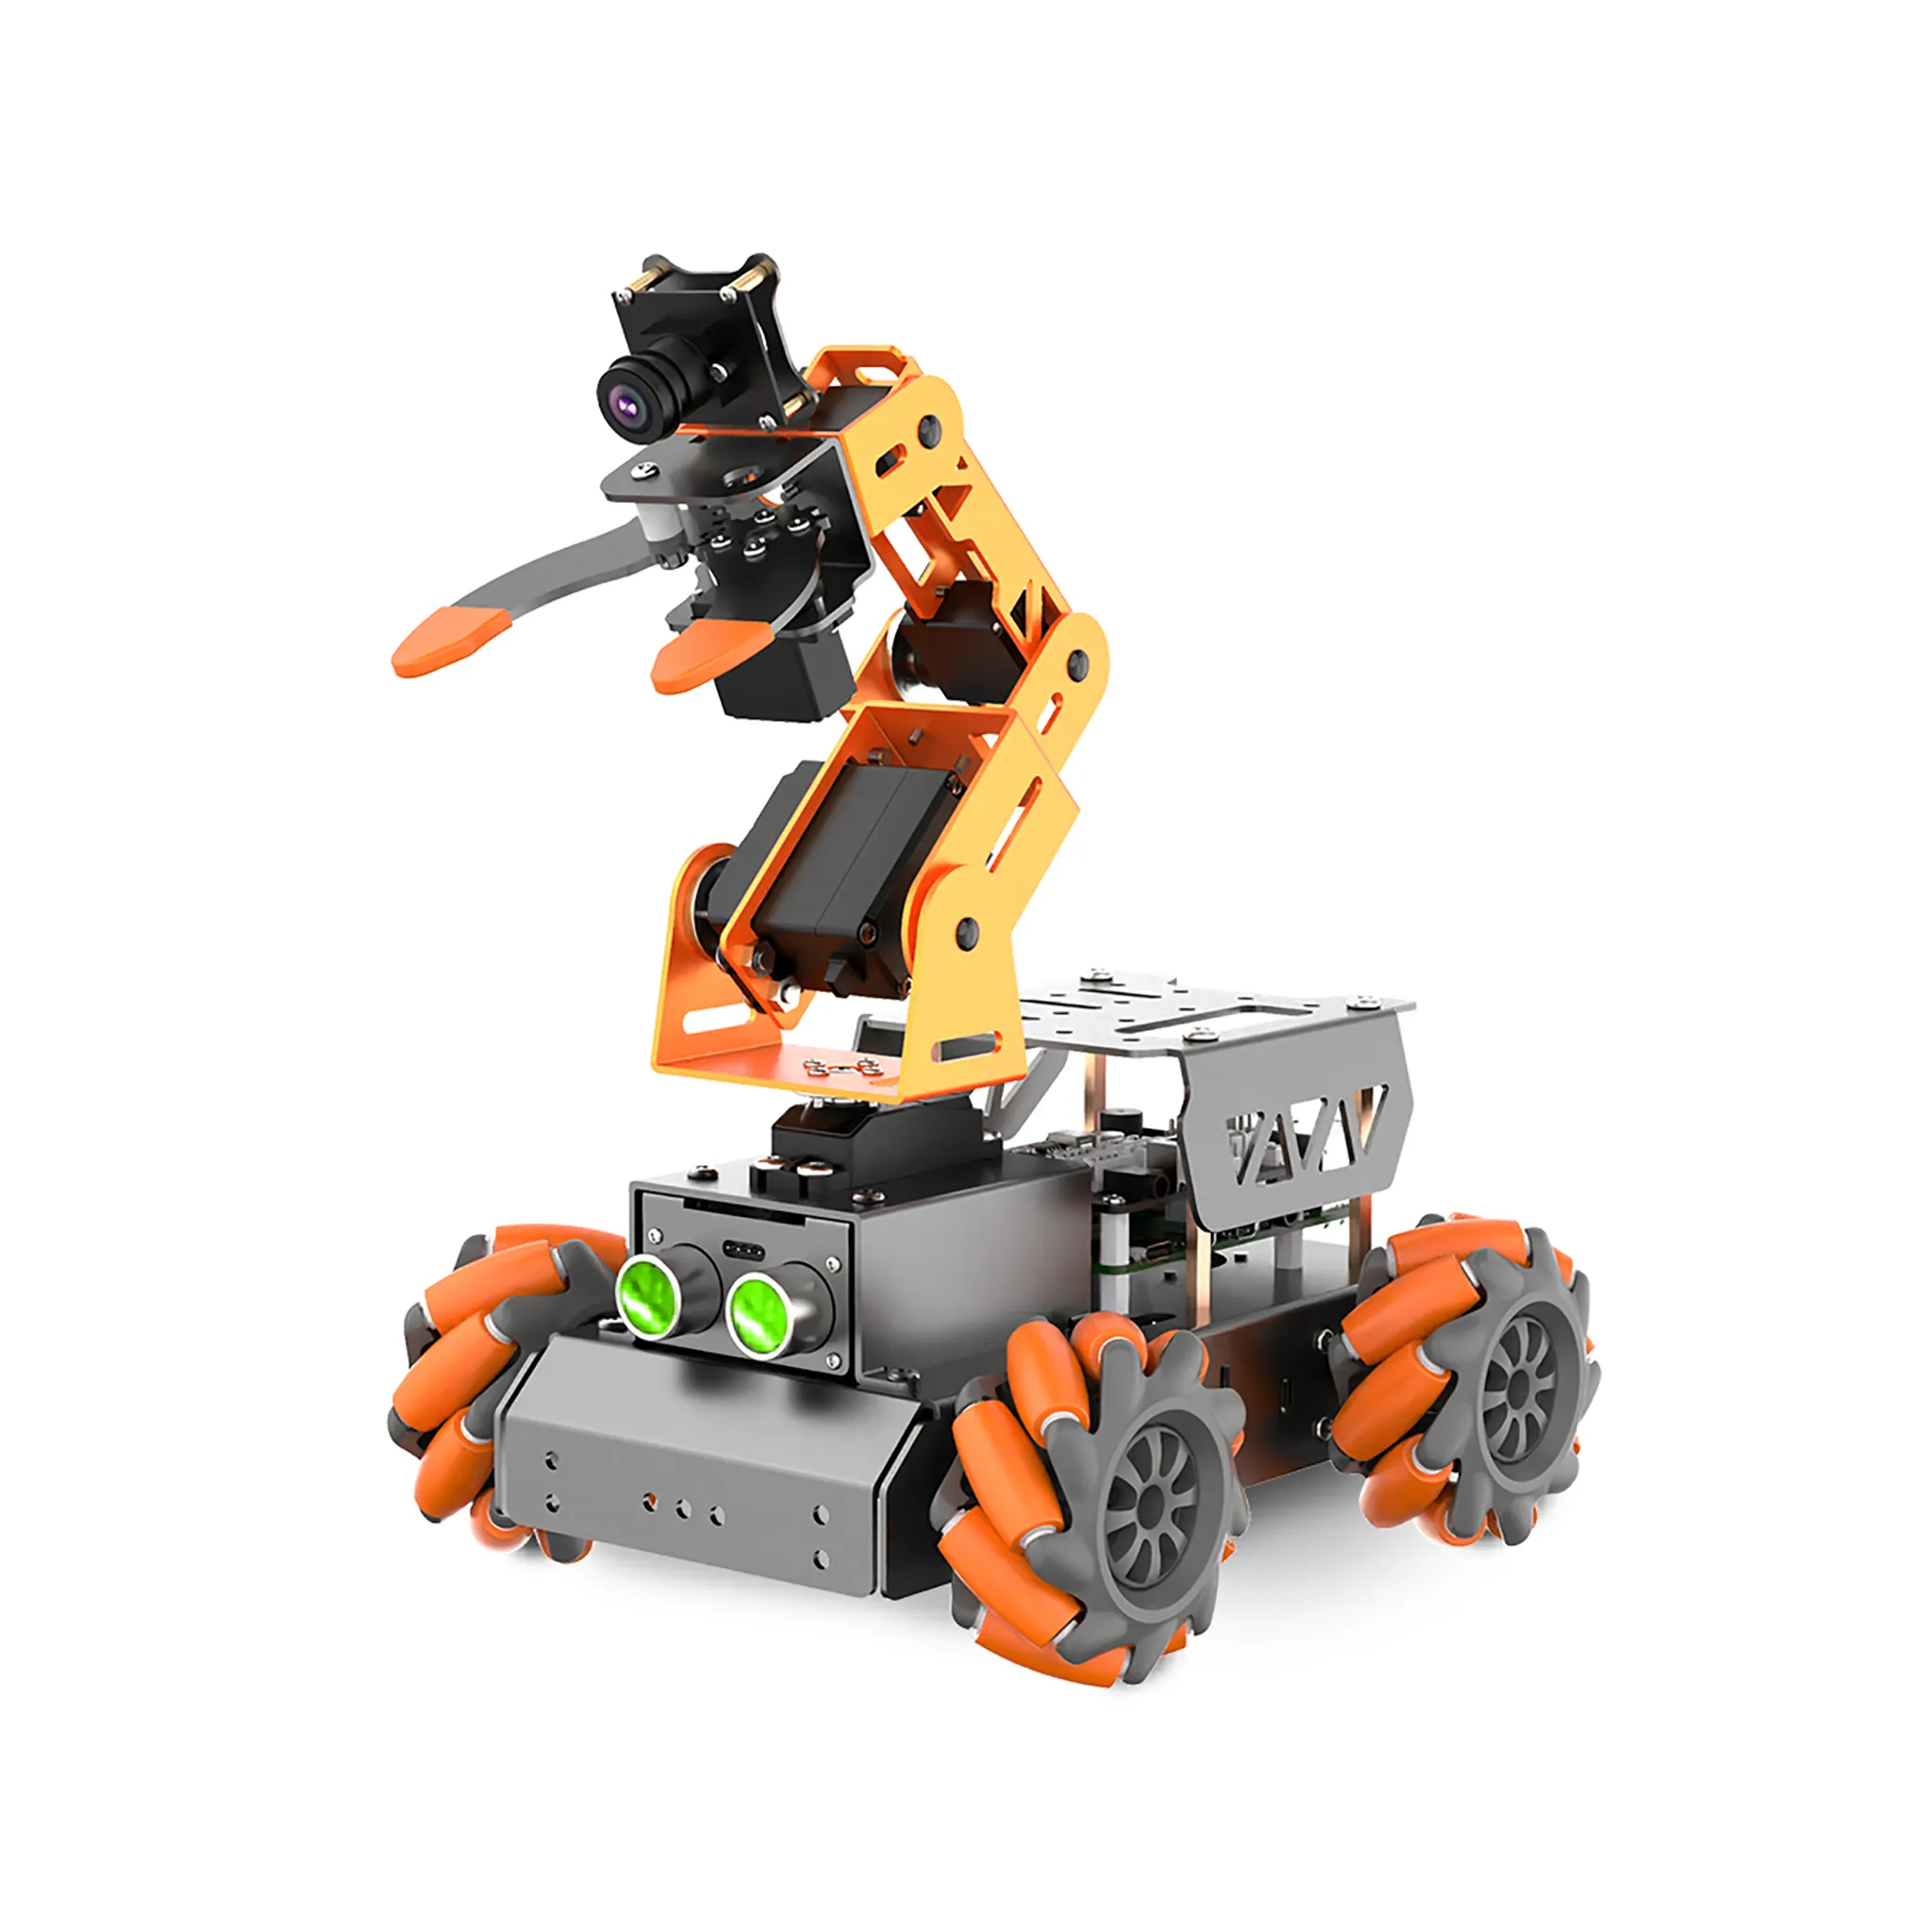 Latest Programming Robot MasterPi Robot Car with 5DOF Robot Arm Based on Raspberry Pi Open Source Code